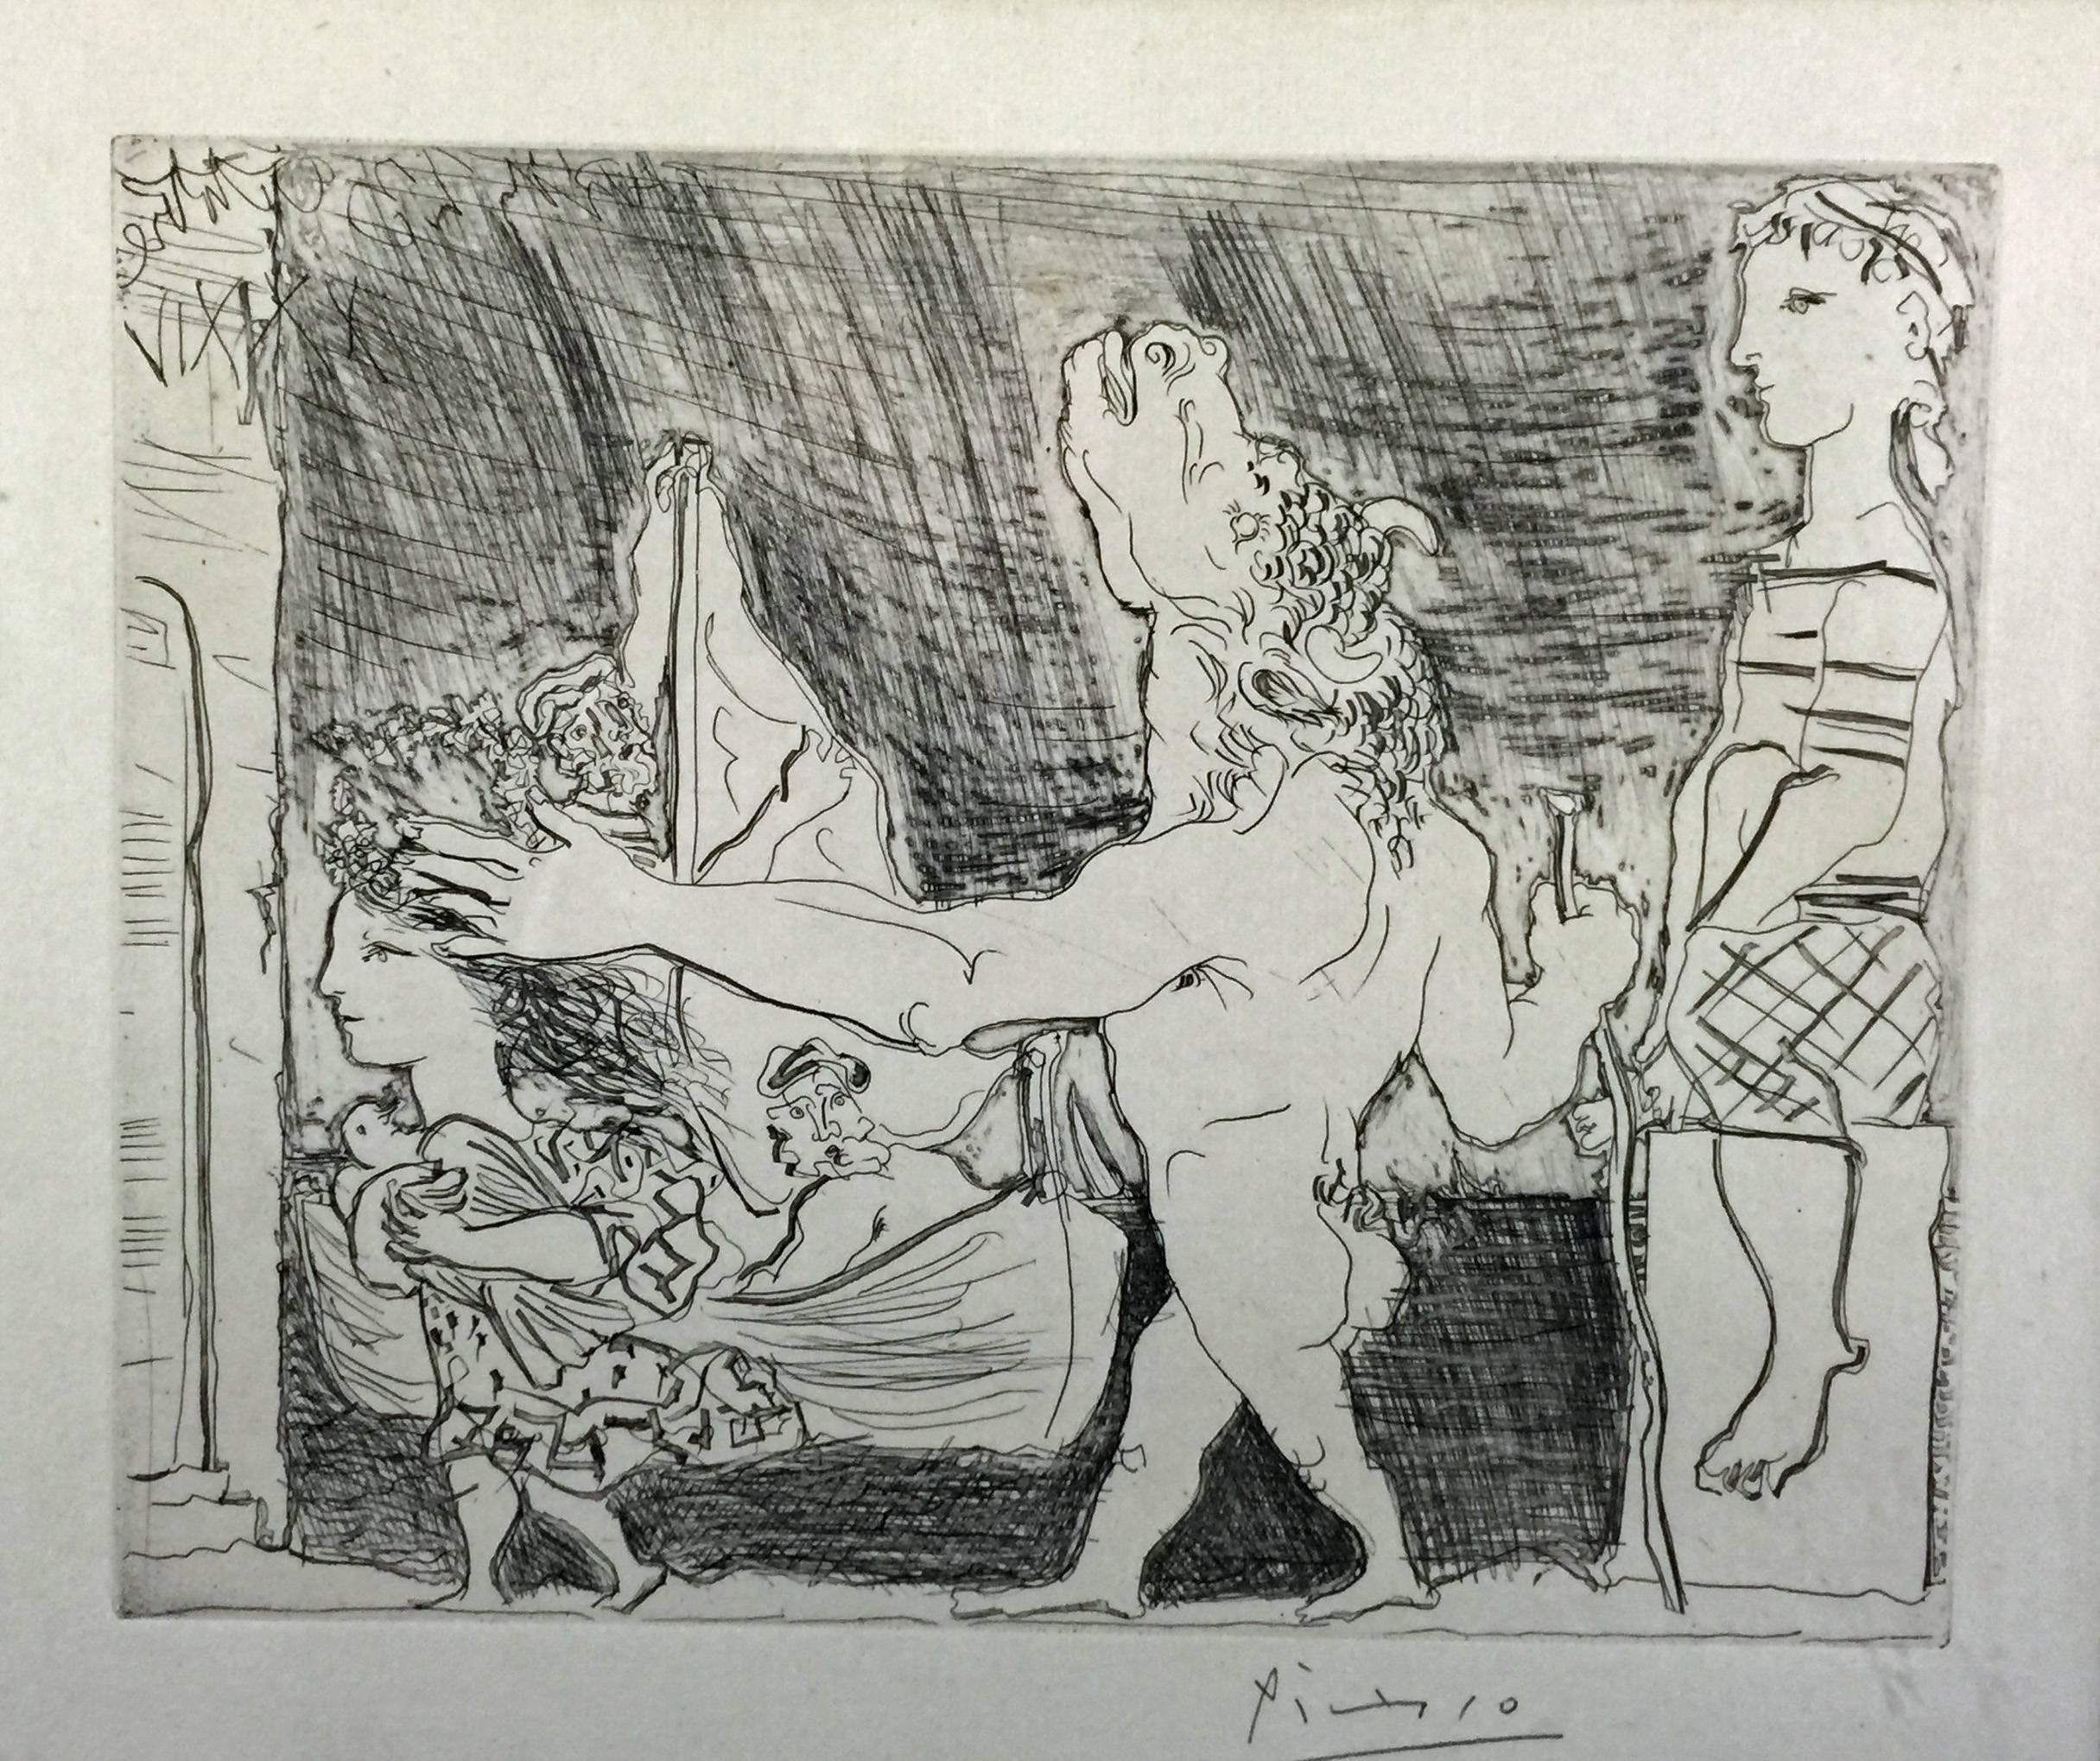 Pablo Picasso Figurative Print - MINOTAURE AVEUGLE GUIDEE PAR UNE FILETTE - BLIND MINOTAUR GUIDED BY A YOUNG GIRL